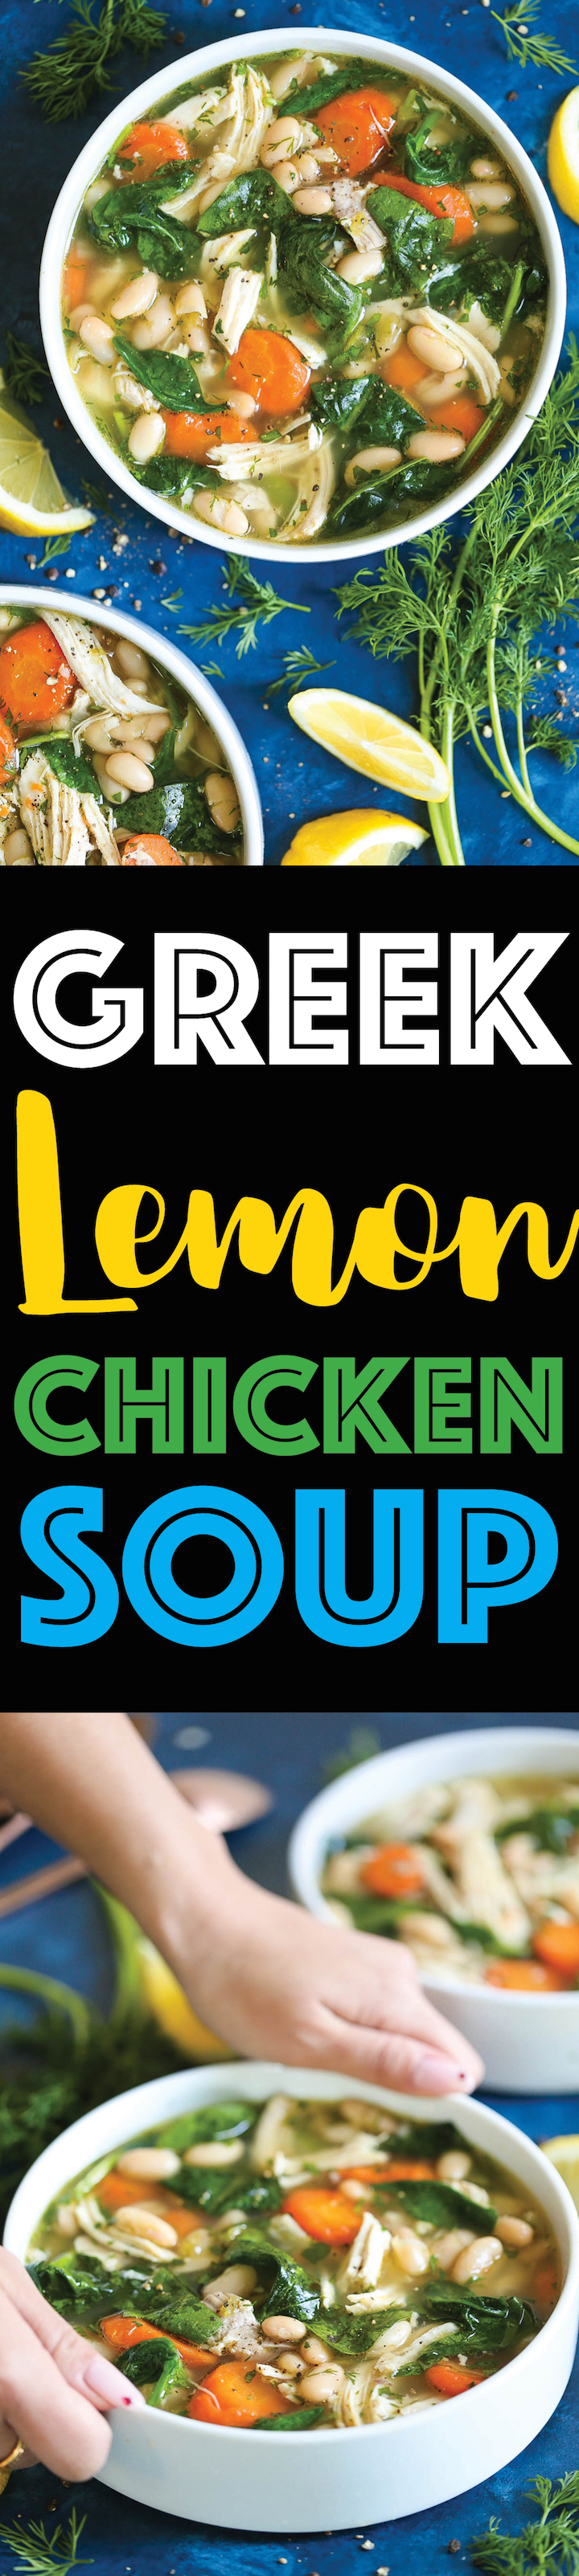 Greek Lemon Chicken Soup - A quick and easy 30 minute chicken soup - so cozy and comforting! We swap out the noodles for cannellini beans for added protein and fiber with way less calories! And the added lemon juice is so refreshing and vibrant!